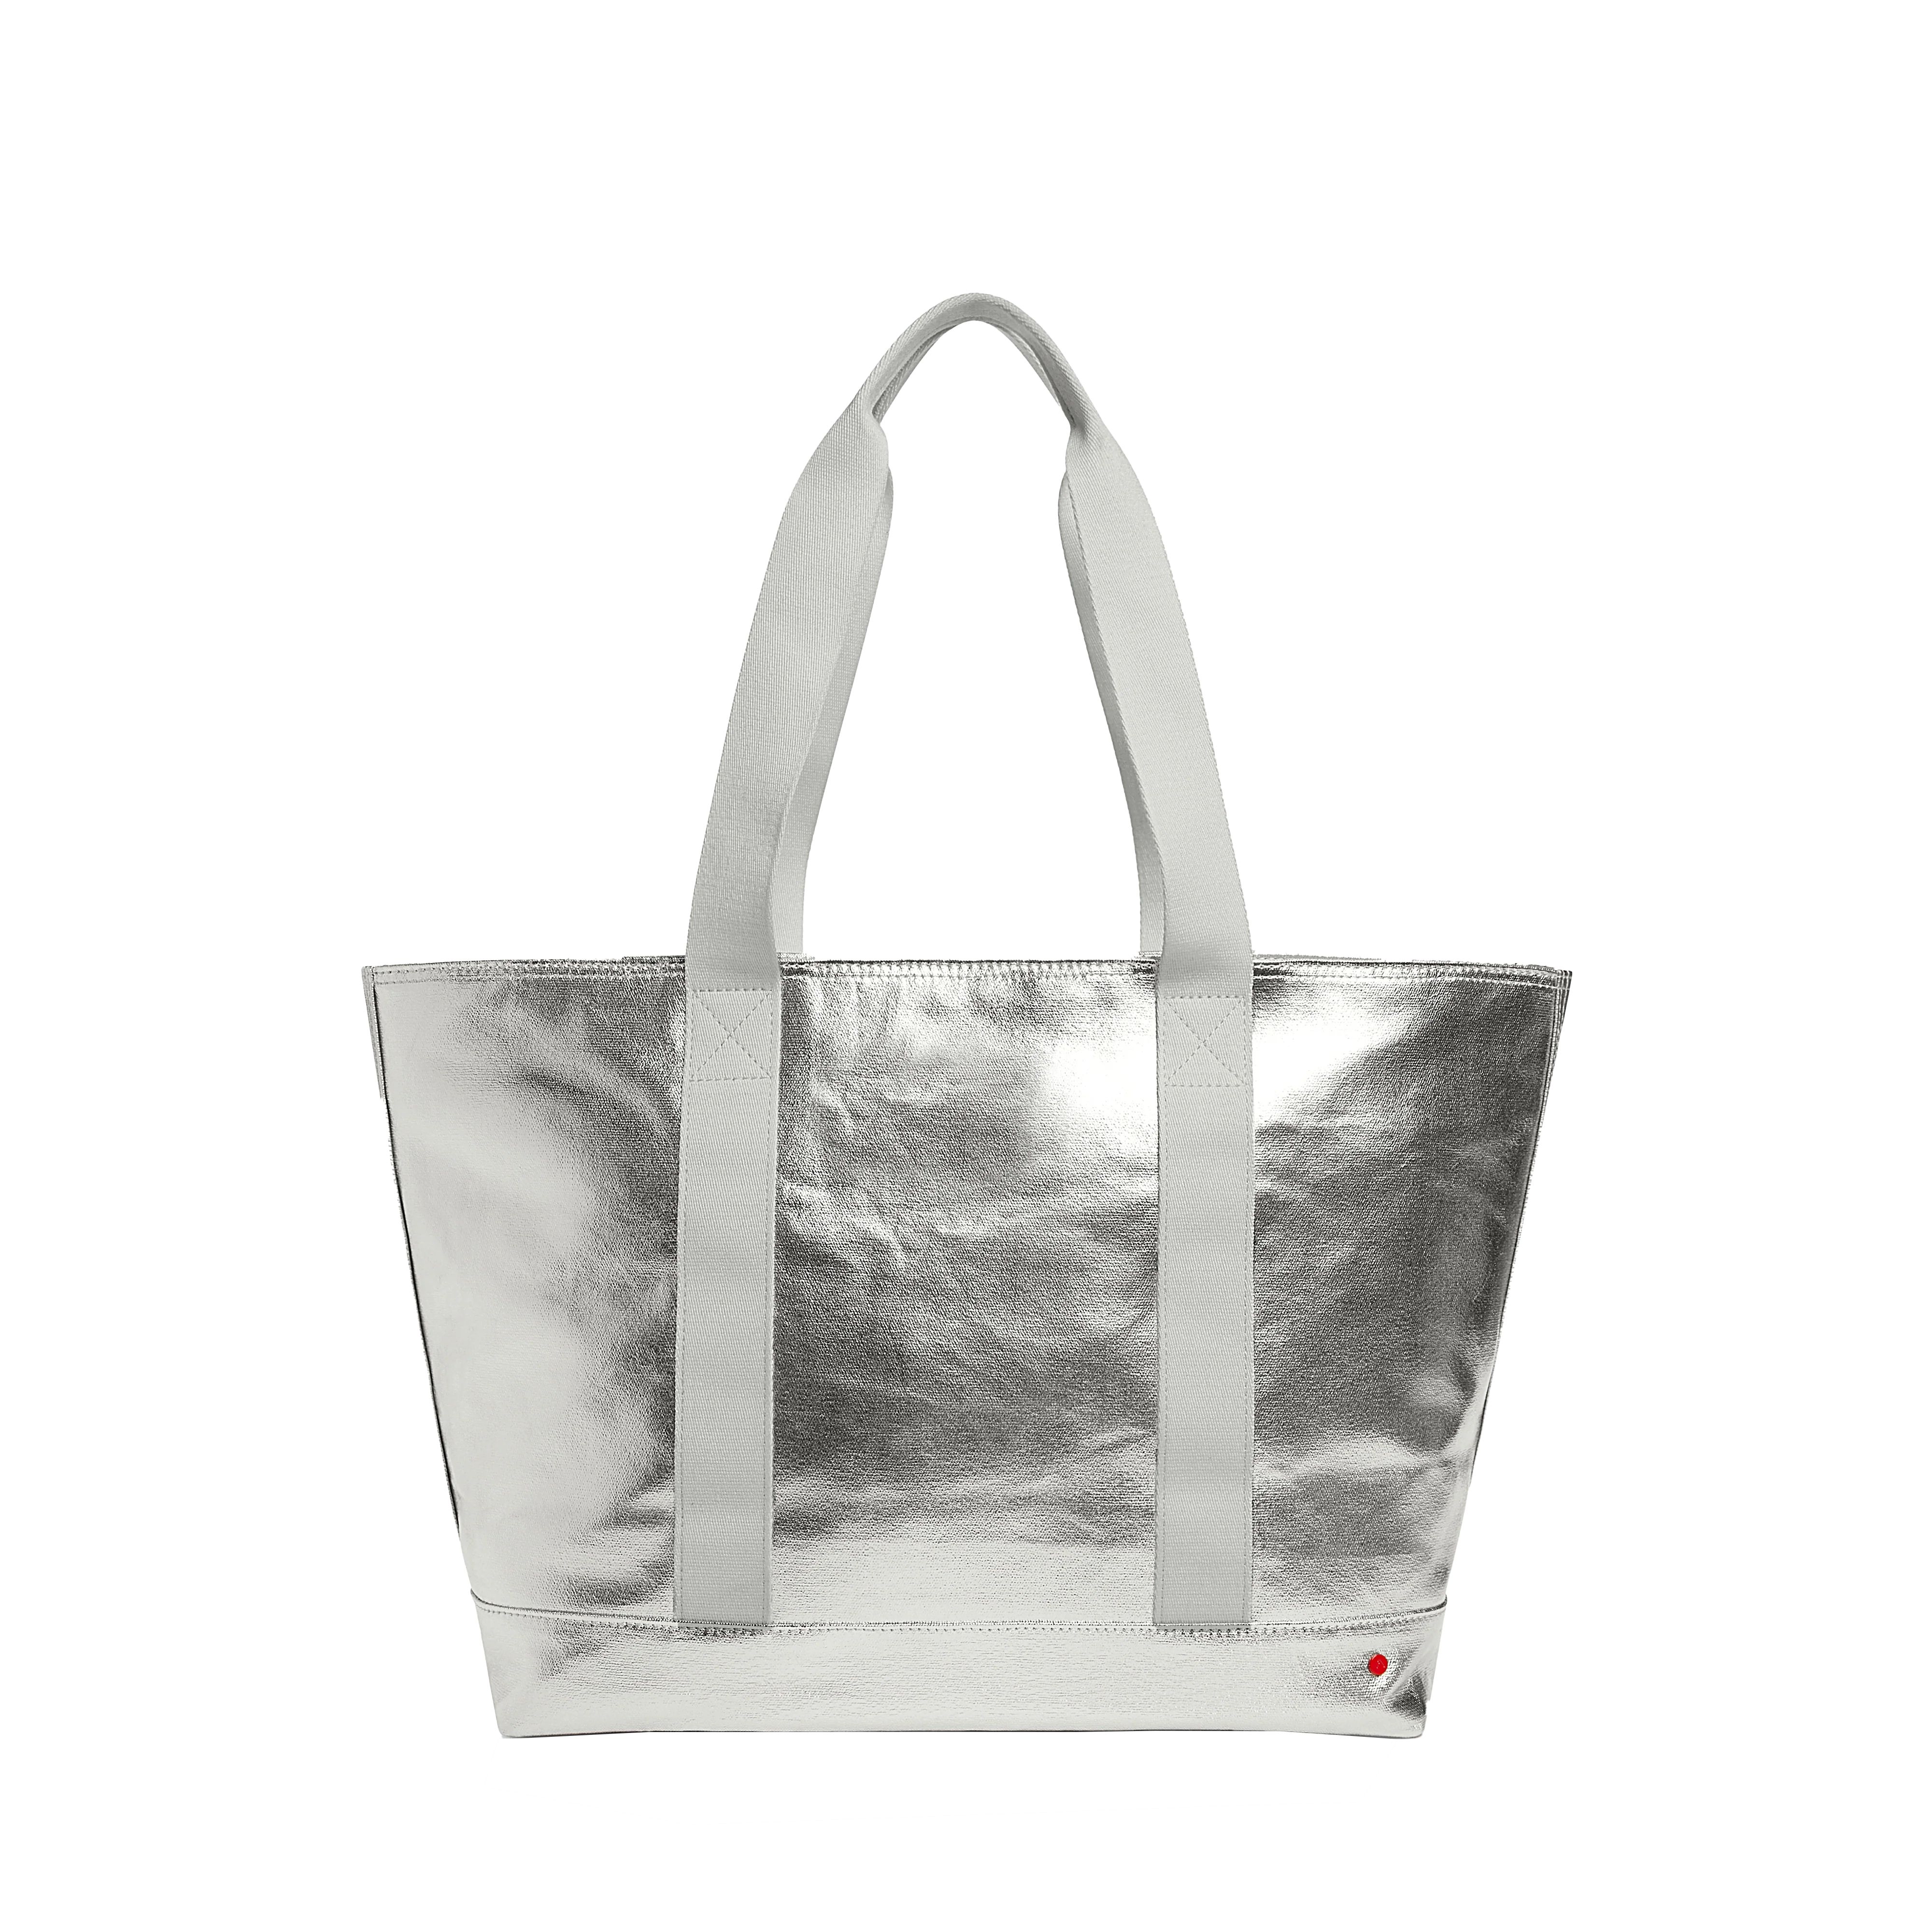 STATE Bags Metallic Tote - Graham in Silver | STATE Bags